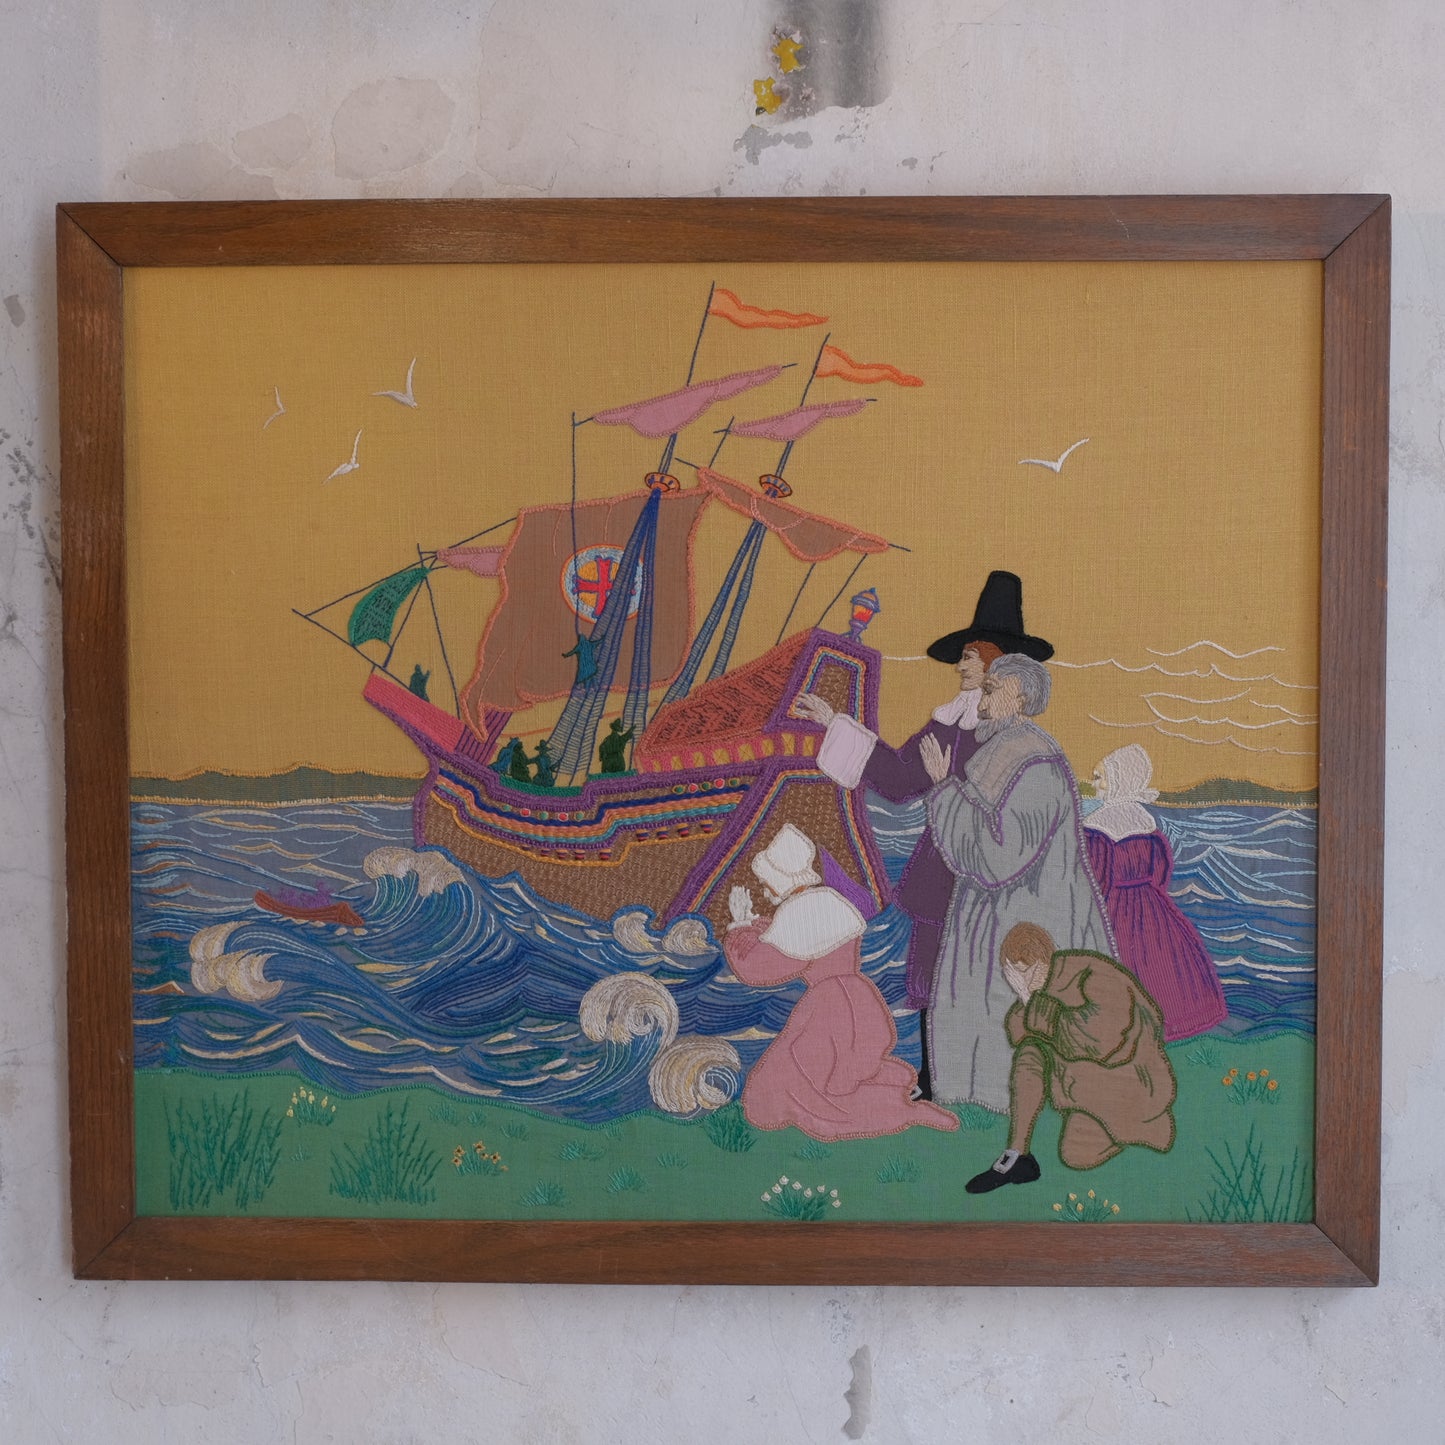 1930's Embroidery depicting Christopher Columbus' ships departure